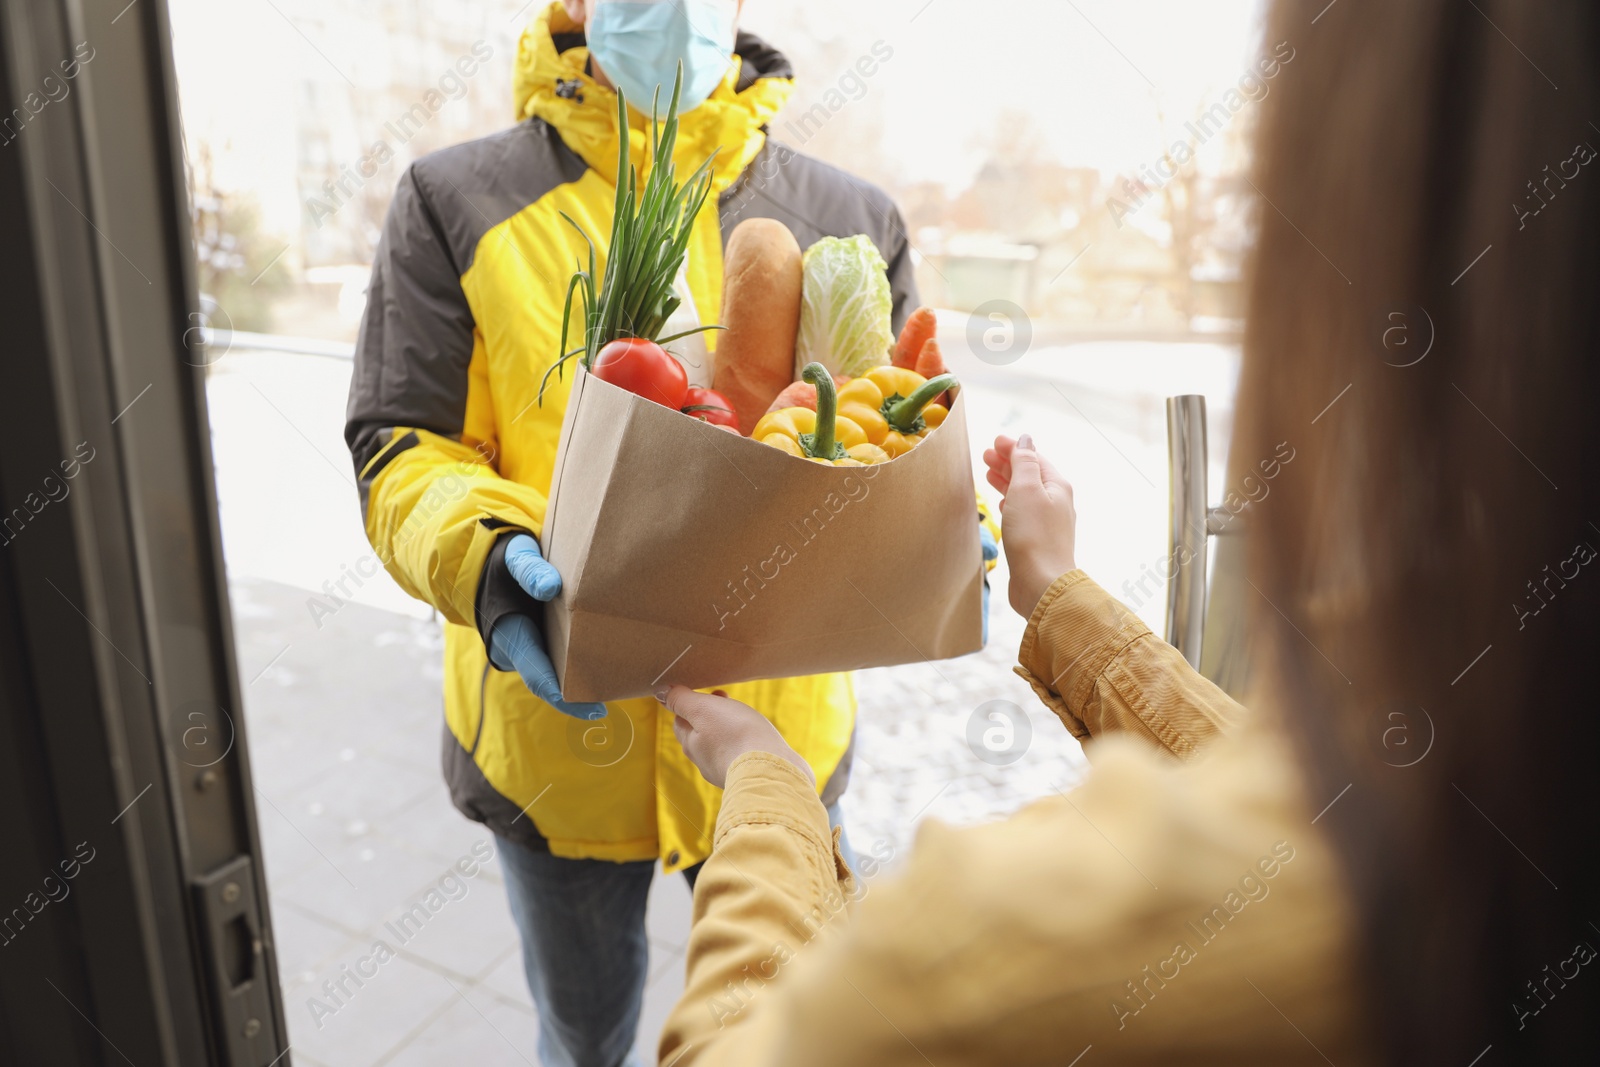 Photo of Courier in medical mask giving paper bag with groceries to woman at doorway, closeup. Delivery service during Covid-19 quarantine